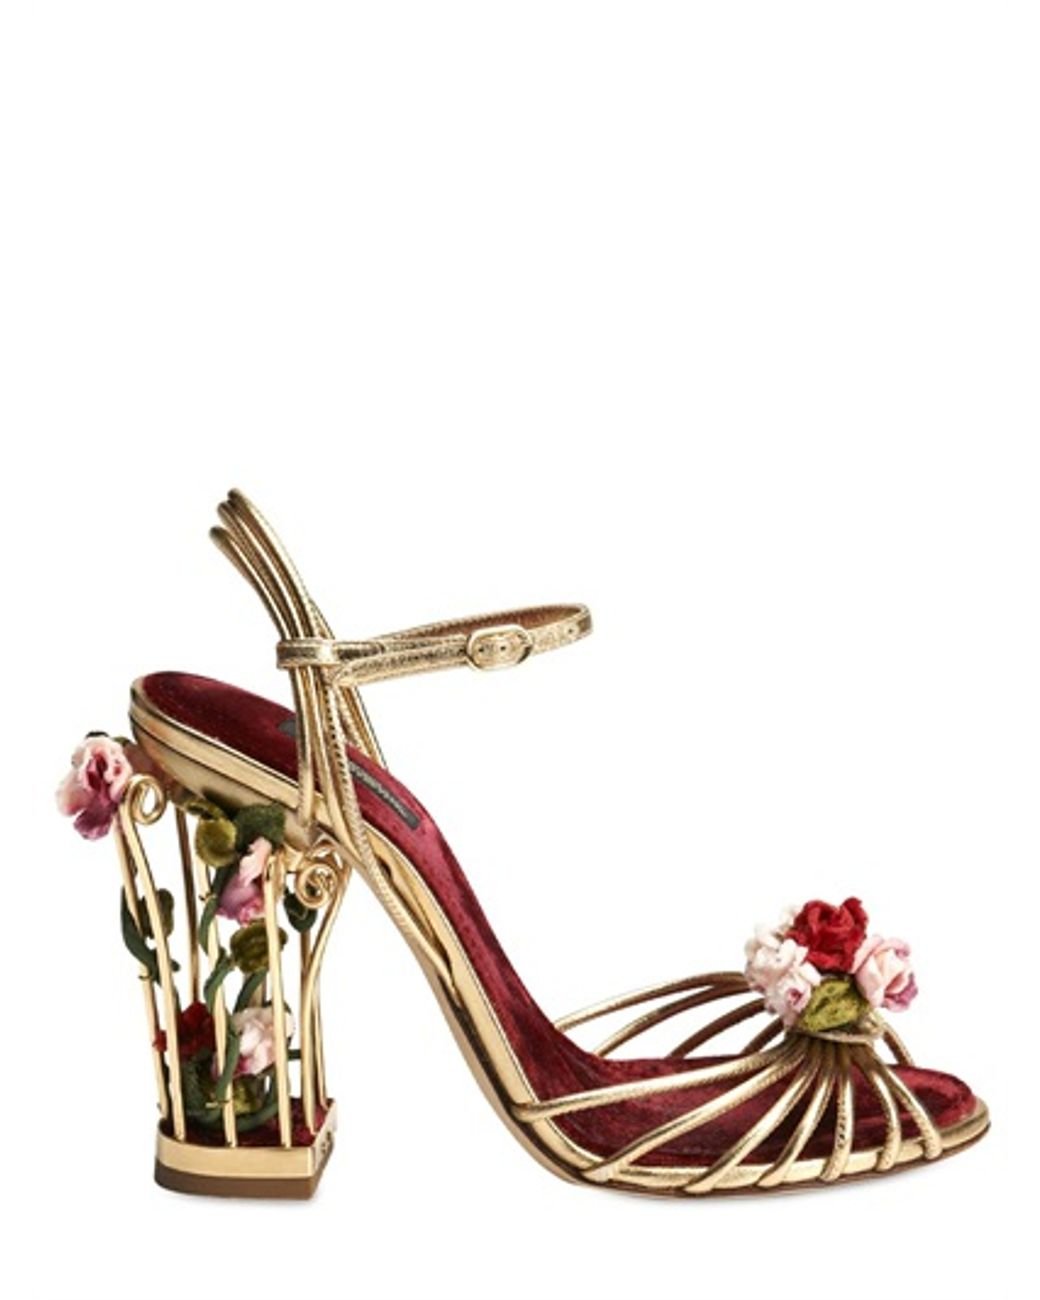 Dolce & Gabbana 105mm Rose Calf Leather Cage Sandals | Lyst